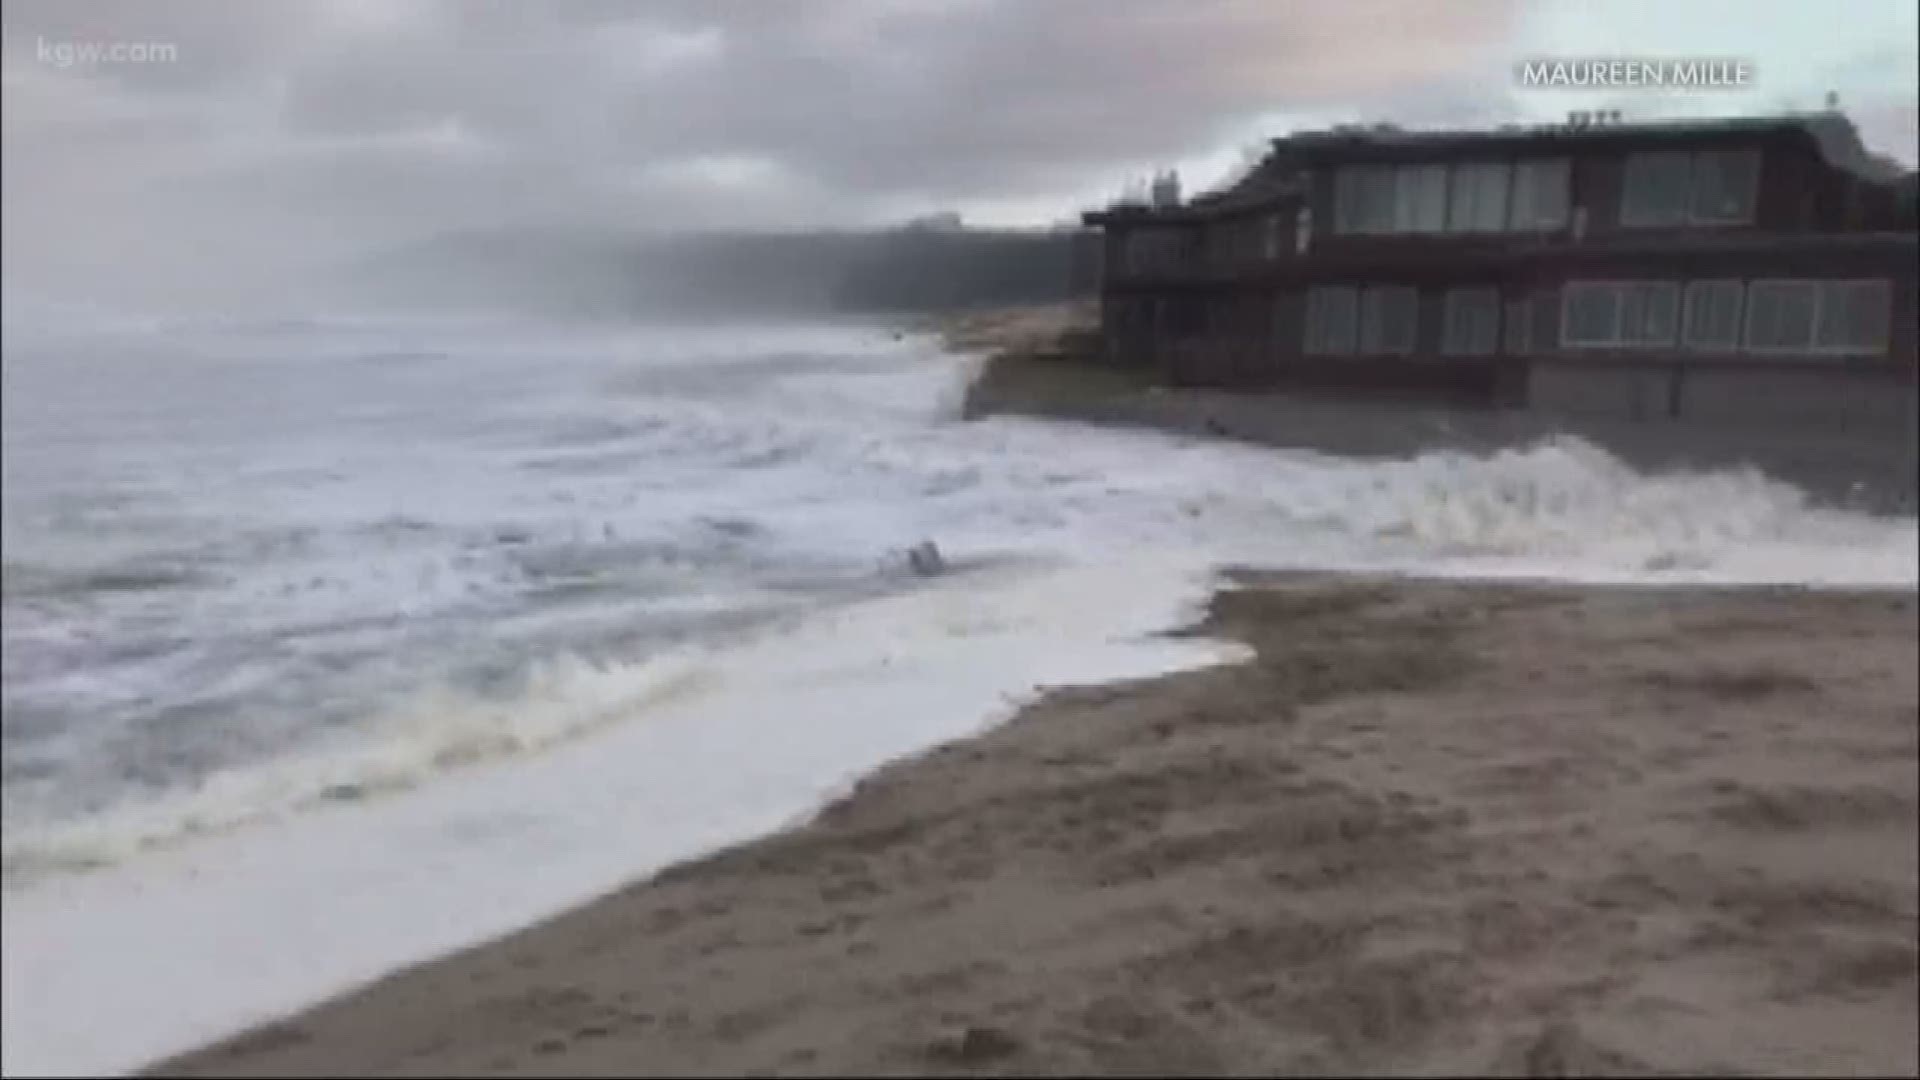 A massive sneaker wave slams into the seawall at Cannon Beach in December 2018. The wave sets logs loose and surges up a paved beach